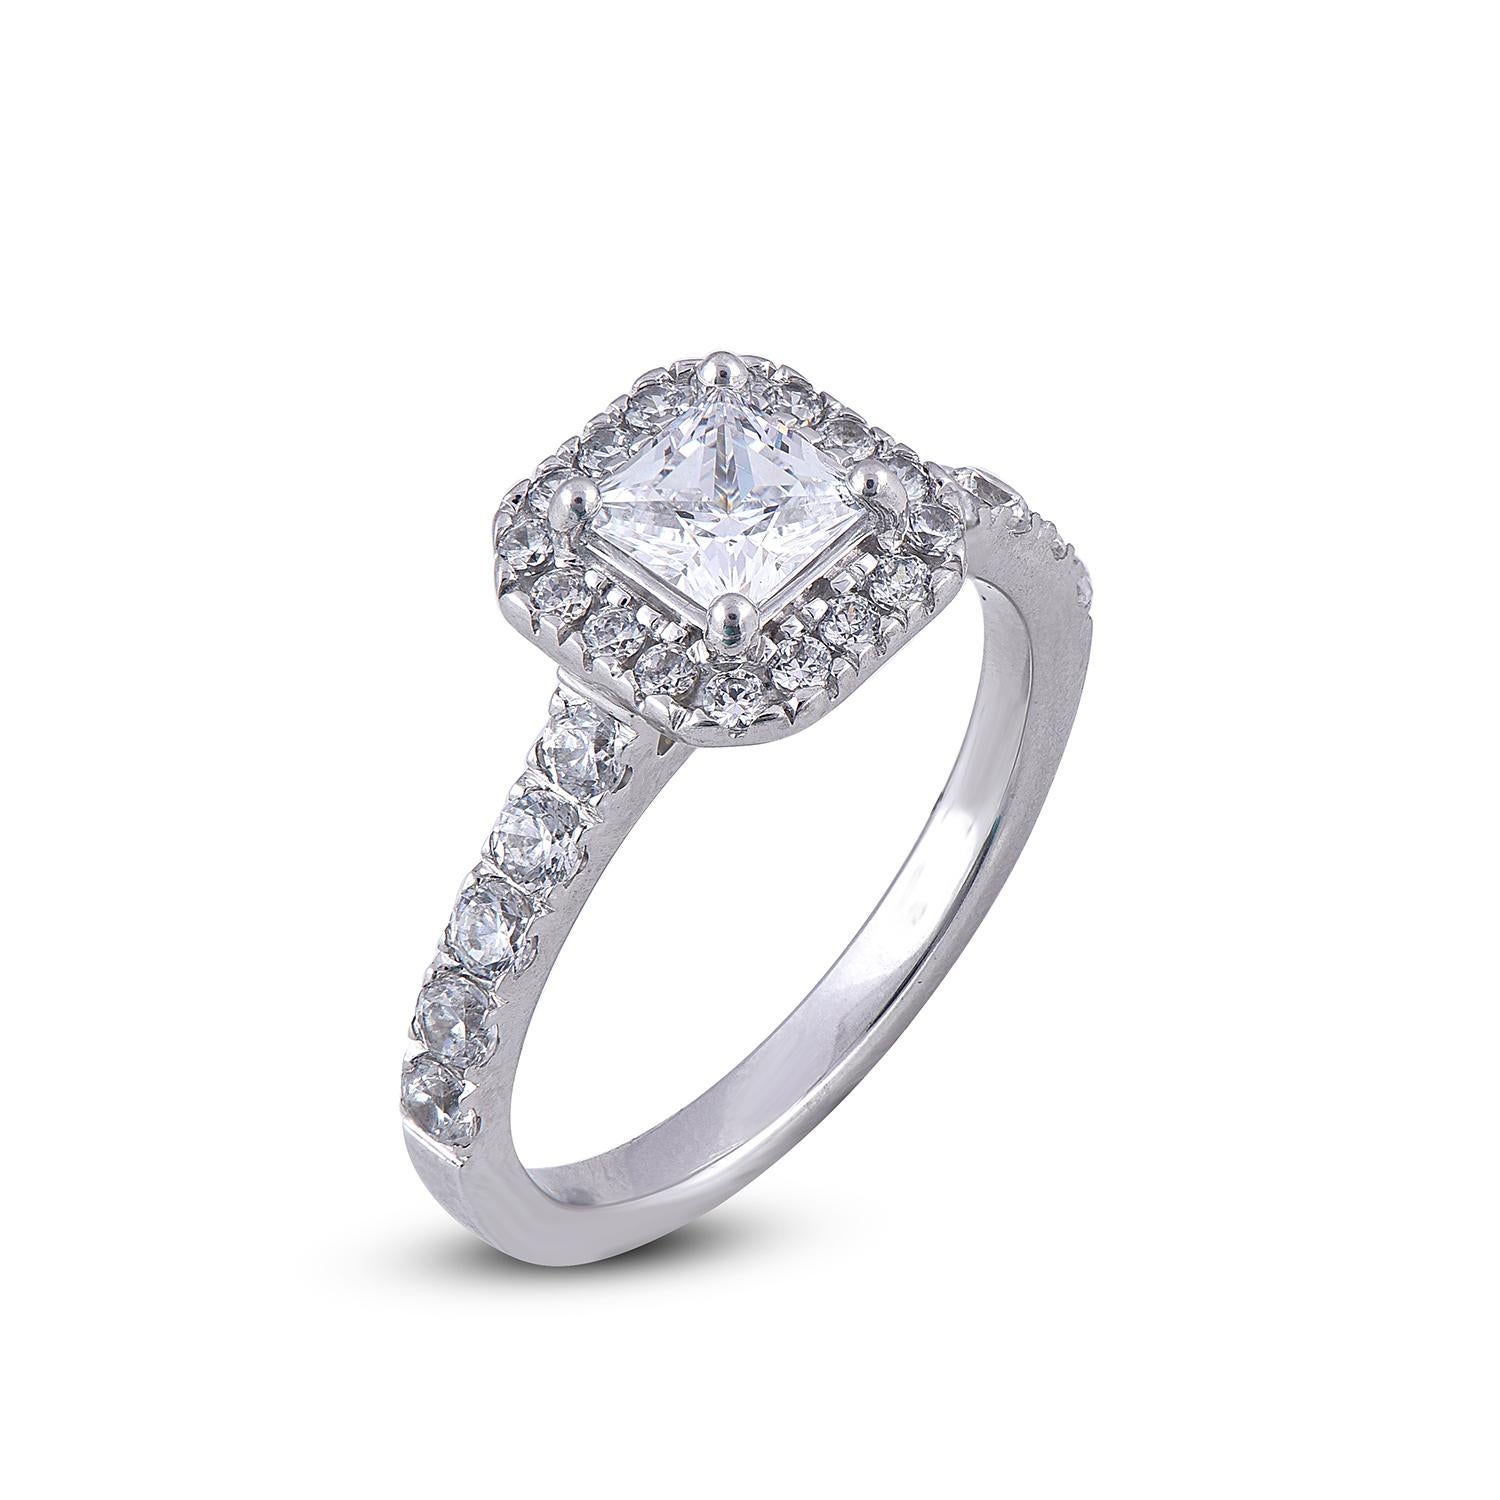 Hand-crafted by our in-house experts in 18 karat white gold with 1.00ct Princess center stone and 0.75ct of diamond lined on frame and shank studded with 26 round cut and 1 princess cut diamond set beautifully in prong and pave setting G-H Color,